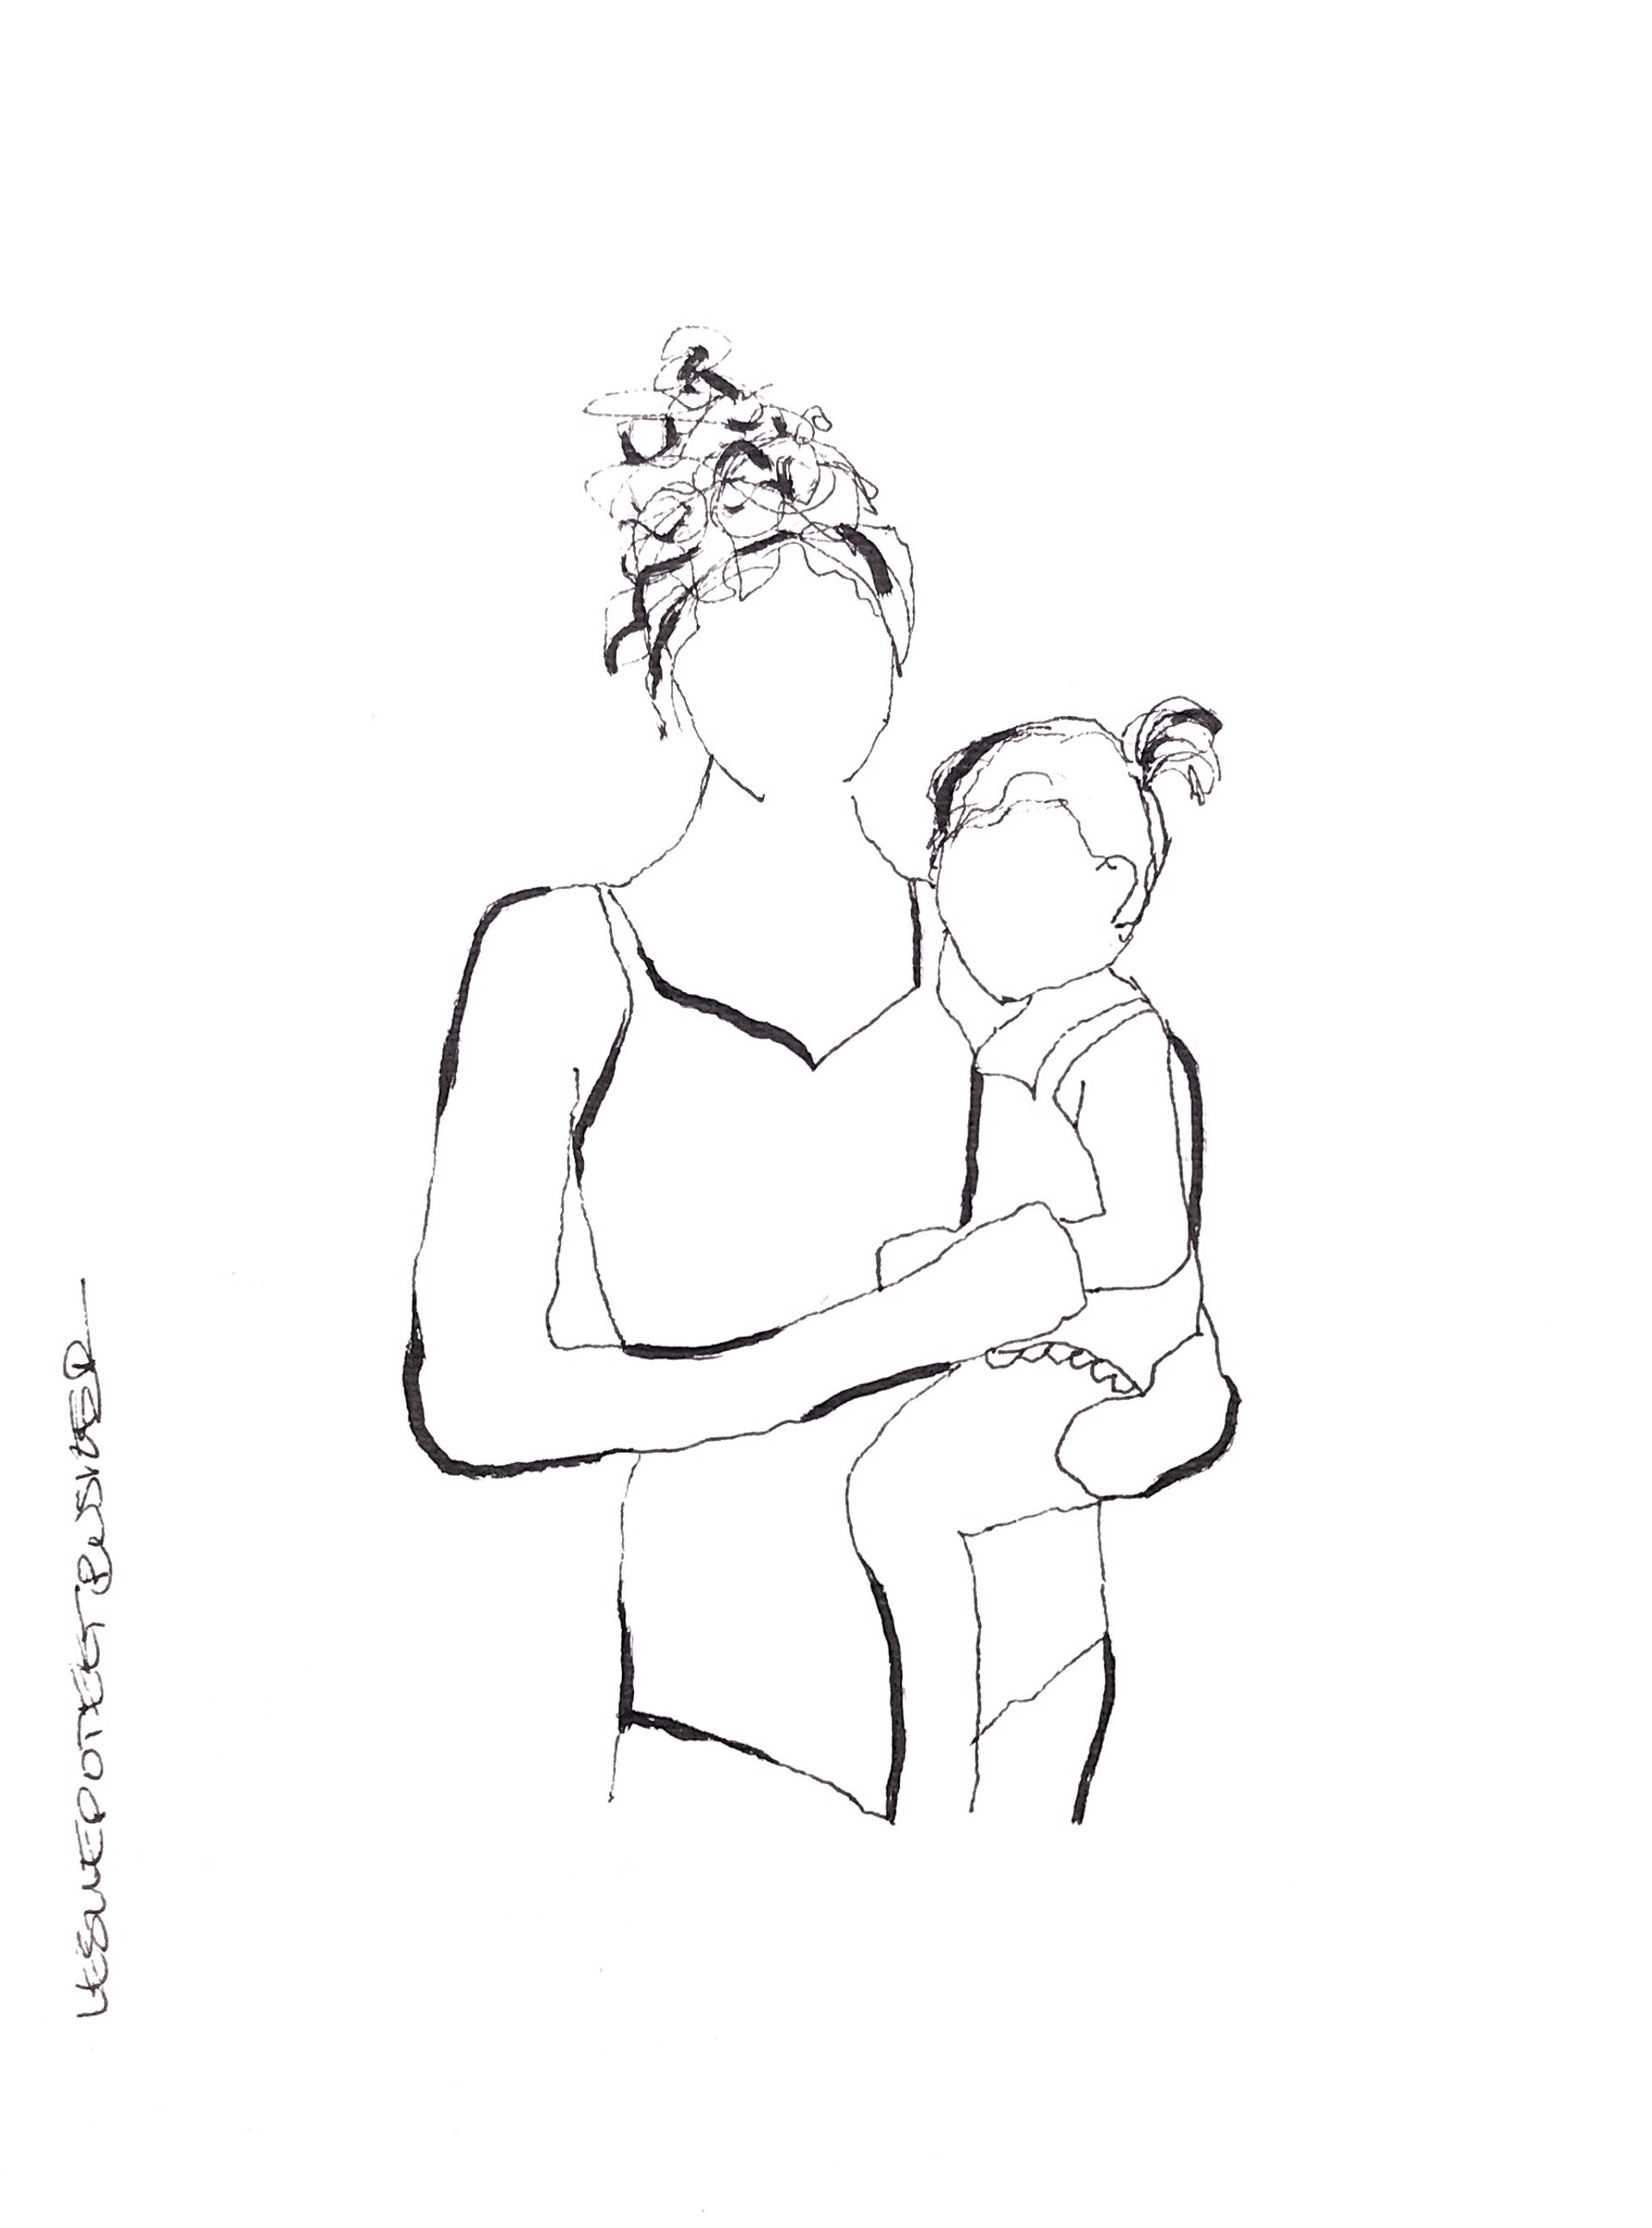 Mother and Child No. 11 by Leslie Poteet Busker